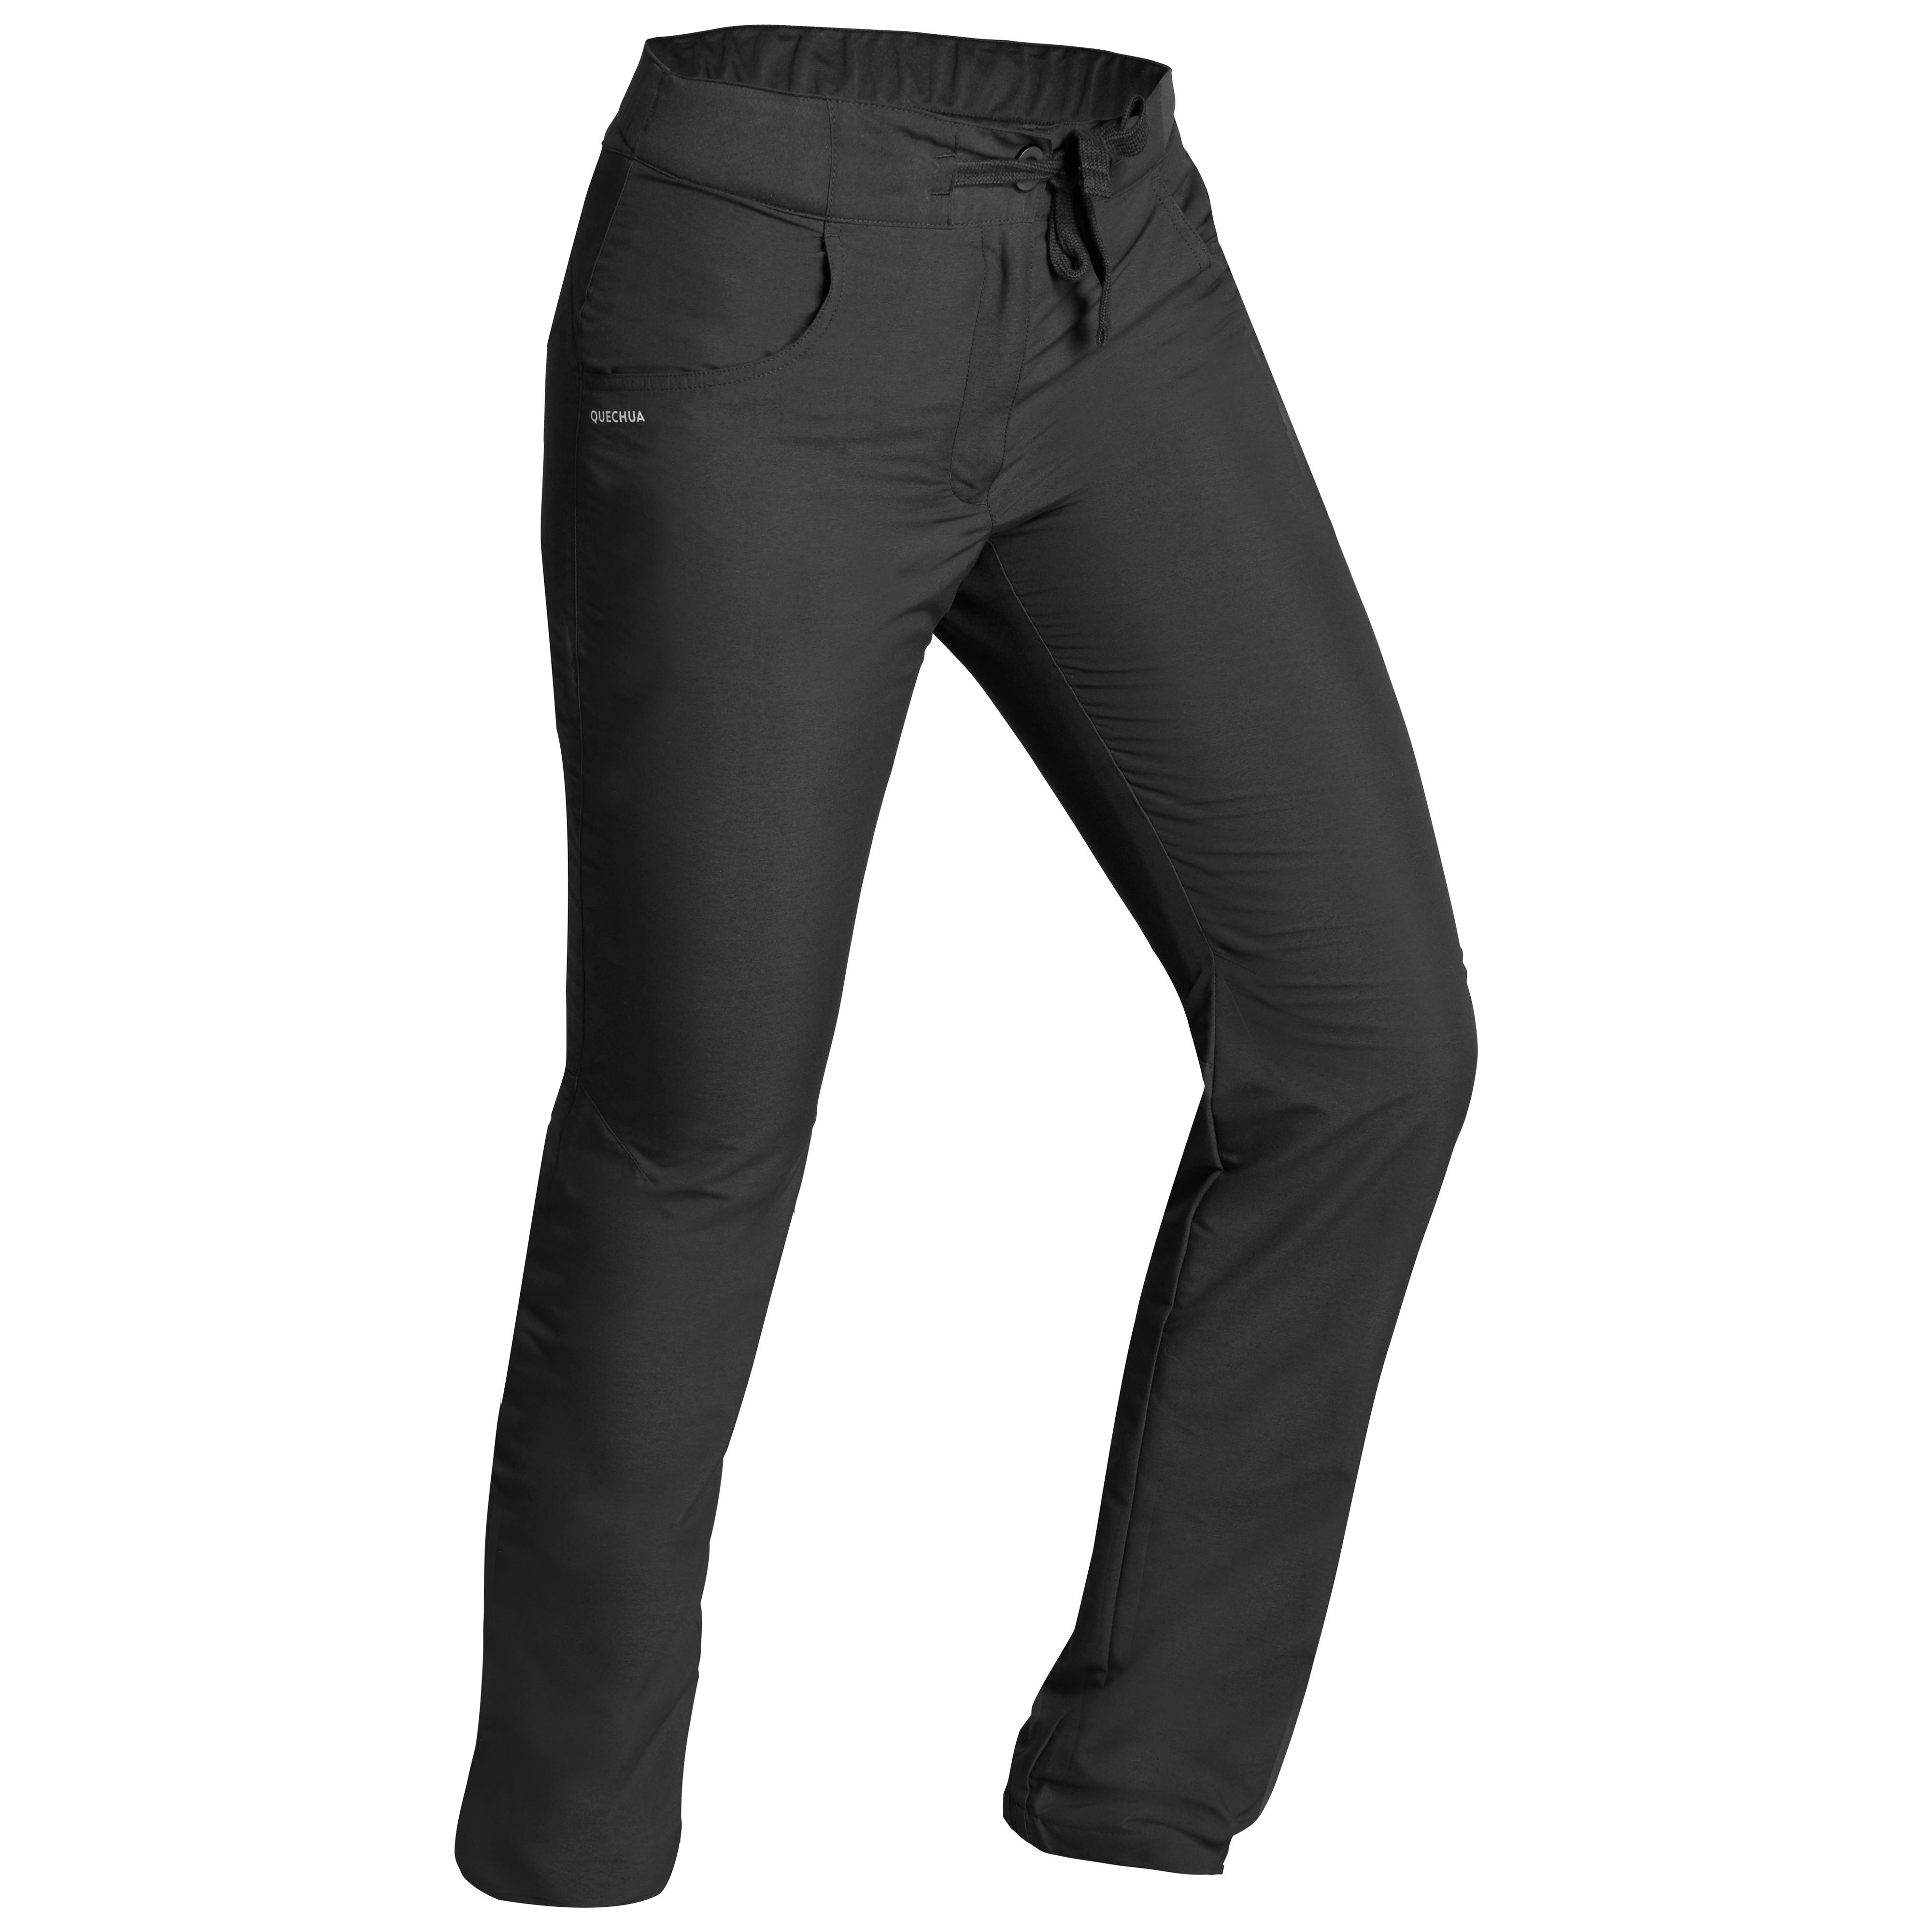 Rydale Ladies Walking Trousers Softshell Water Resistant Women's Hiking  Trouser Outdoor Pants 2 Colours (Black, 8) : Amazon.co.uk: Fashion